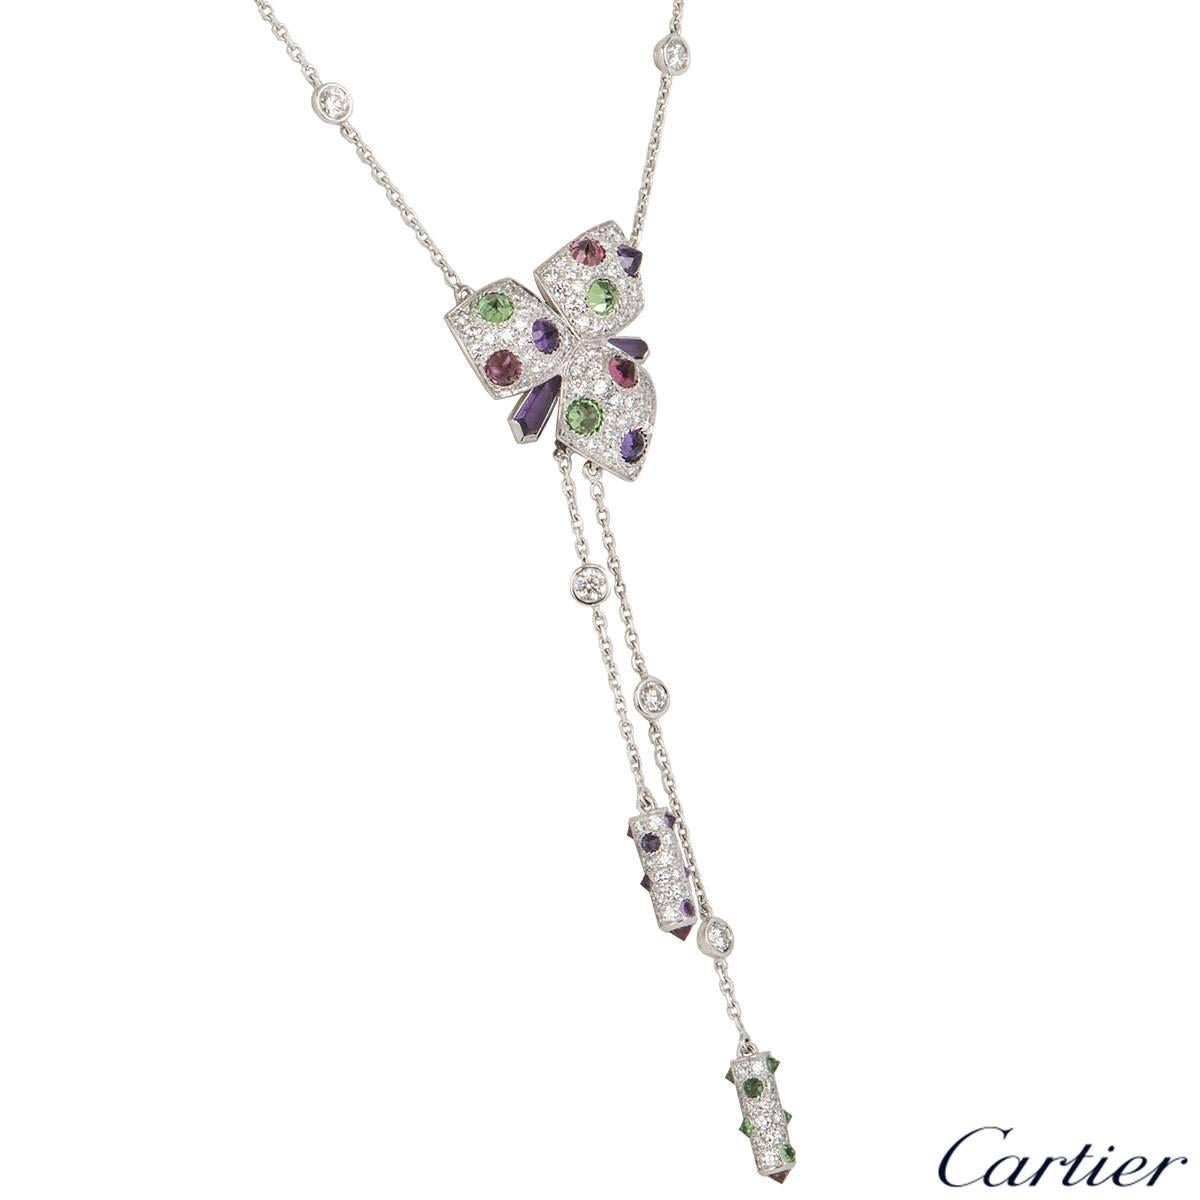 A beautiful 18k white gold necklace from the Caresse d'Orchidées collection by Cartier. The main body of the necklace features reverse set amethysts, pink tourmalines, tsavorites and pave round brilliant cut diamonds totalling approximately 0.80ct.